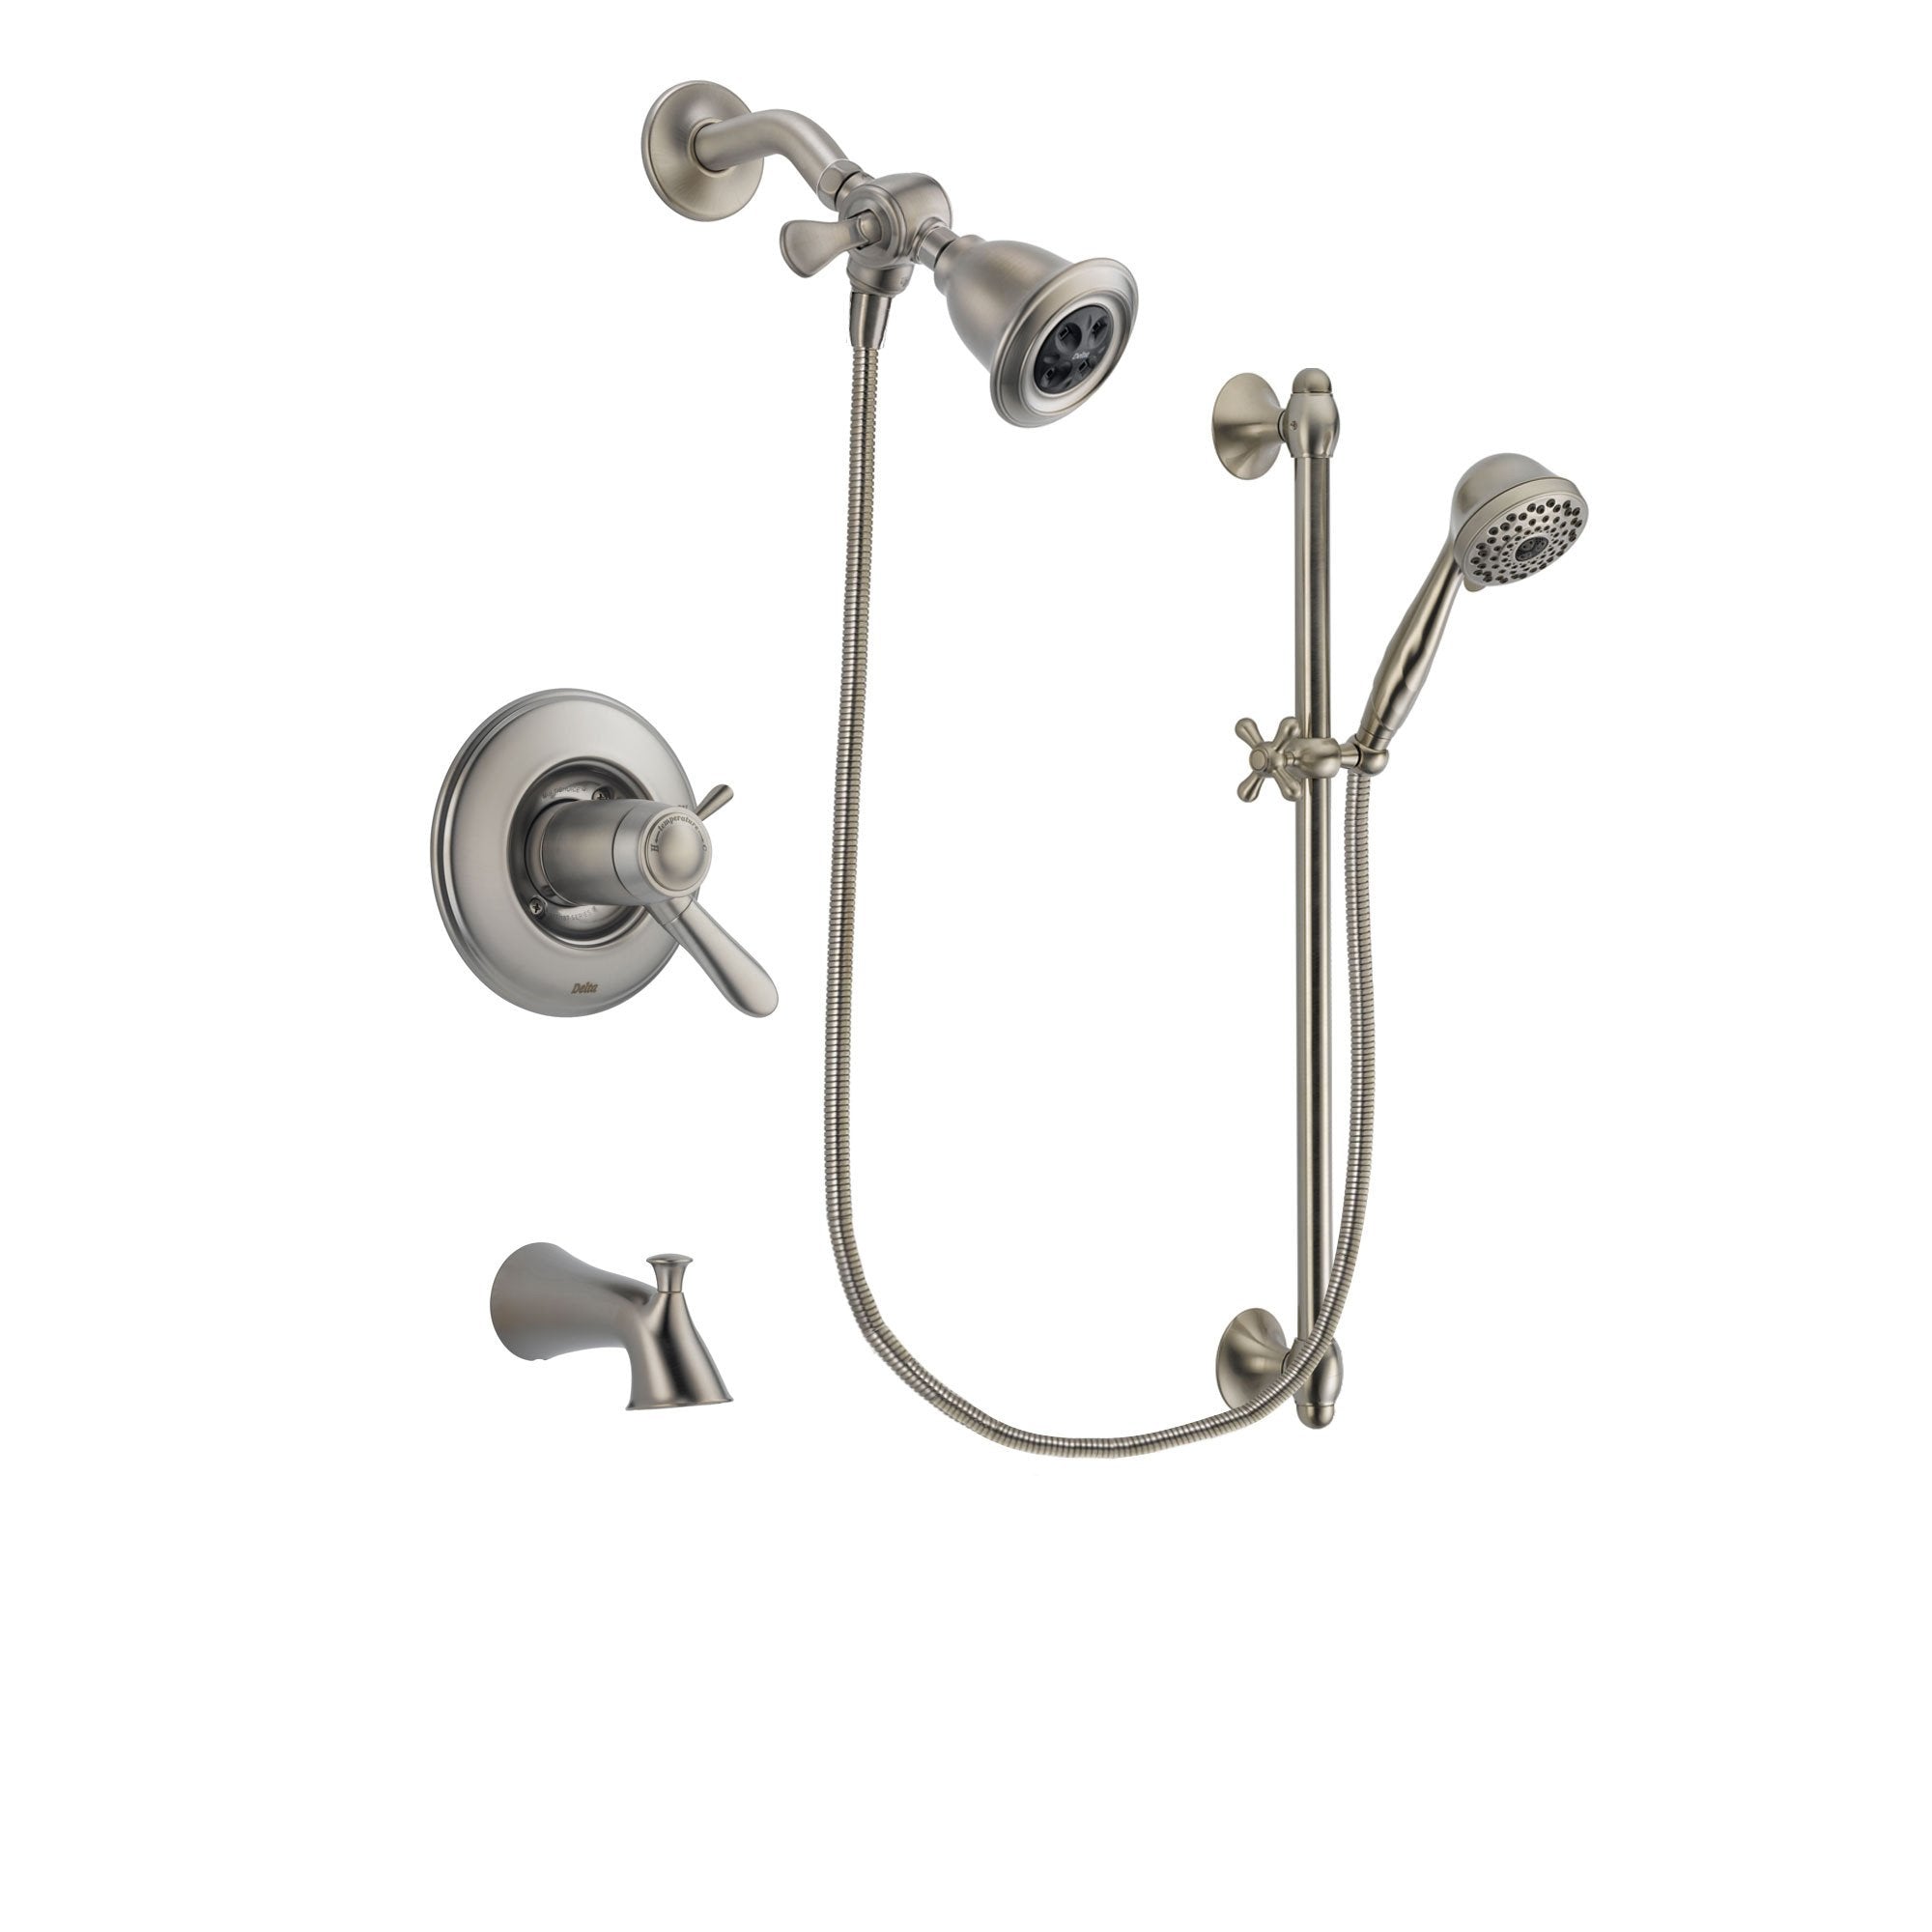 Delta Lahara Stainless Steel Finish Thermostatic Tub and Shower Faucet System Package with Water Efficient Showerhead and 7-Spray Handheld Shower with Slide Bar Includes Rough-in Valve and Tub Spout DSP1683V